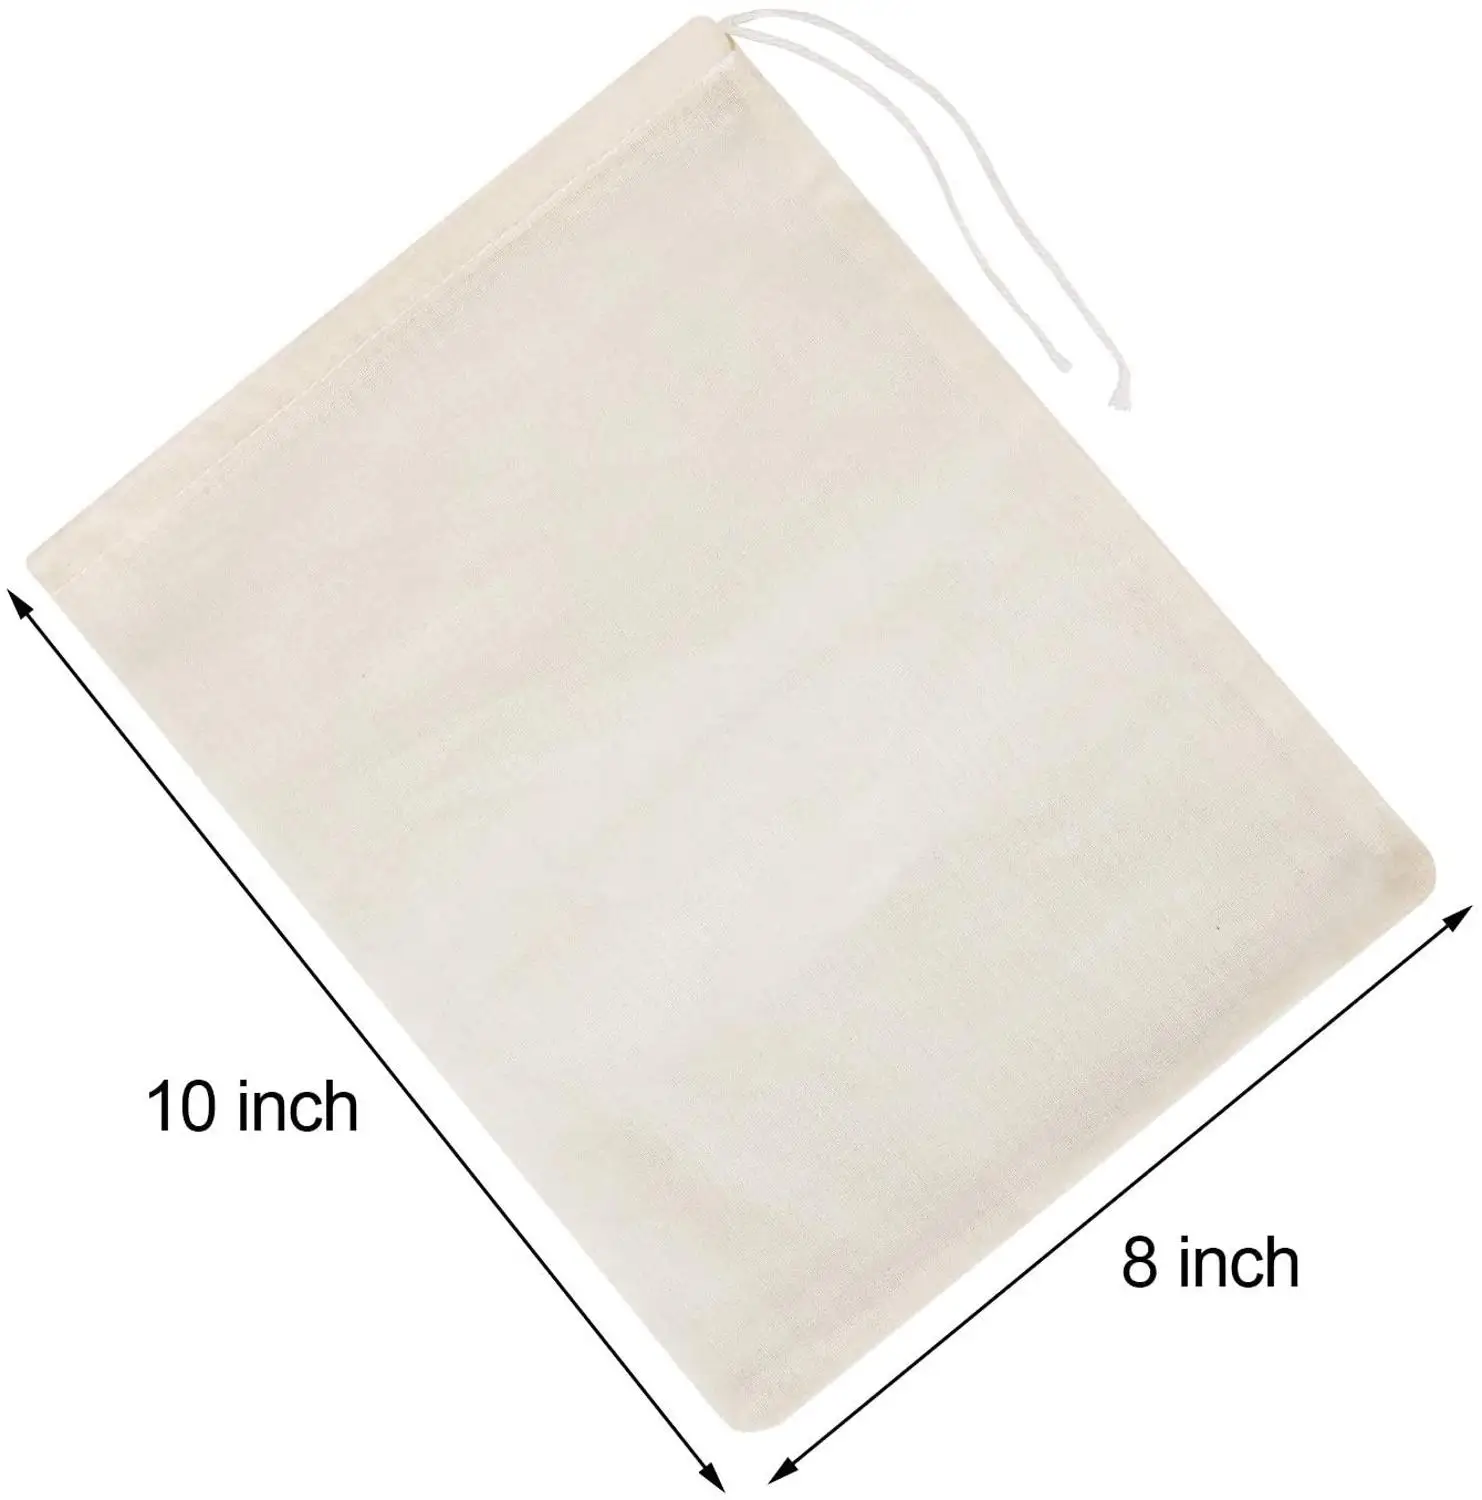 Cheesecloth Bags Nut Milk Strainer Cotton Muslin Bags Mesh Food Bags for Yogurt Coffee Tea Juice Wine Supplies Nylon Filter SGS images - 6